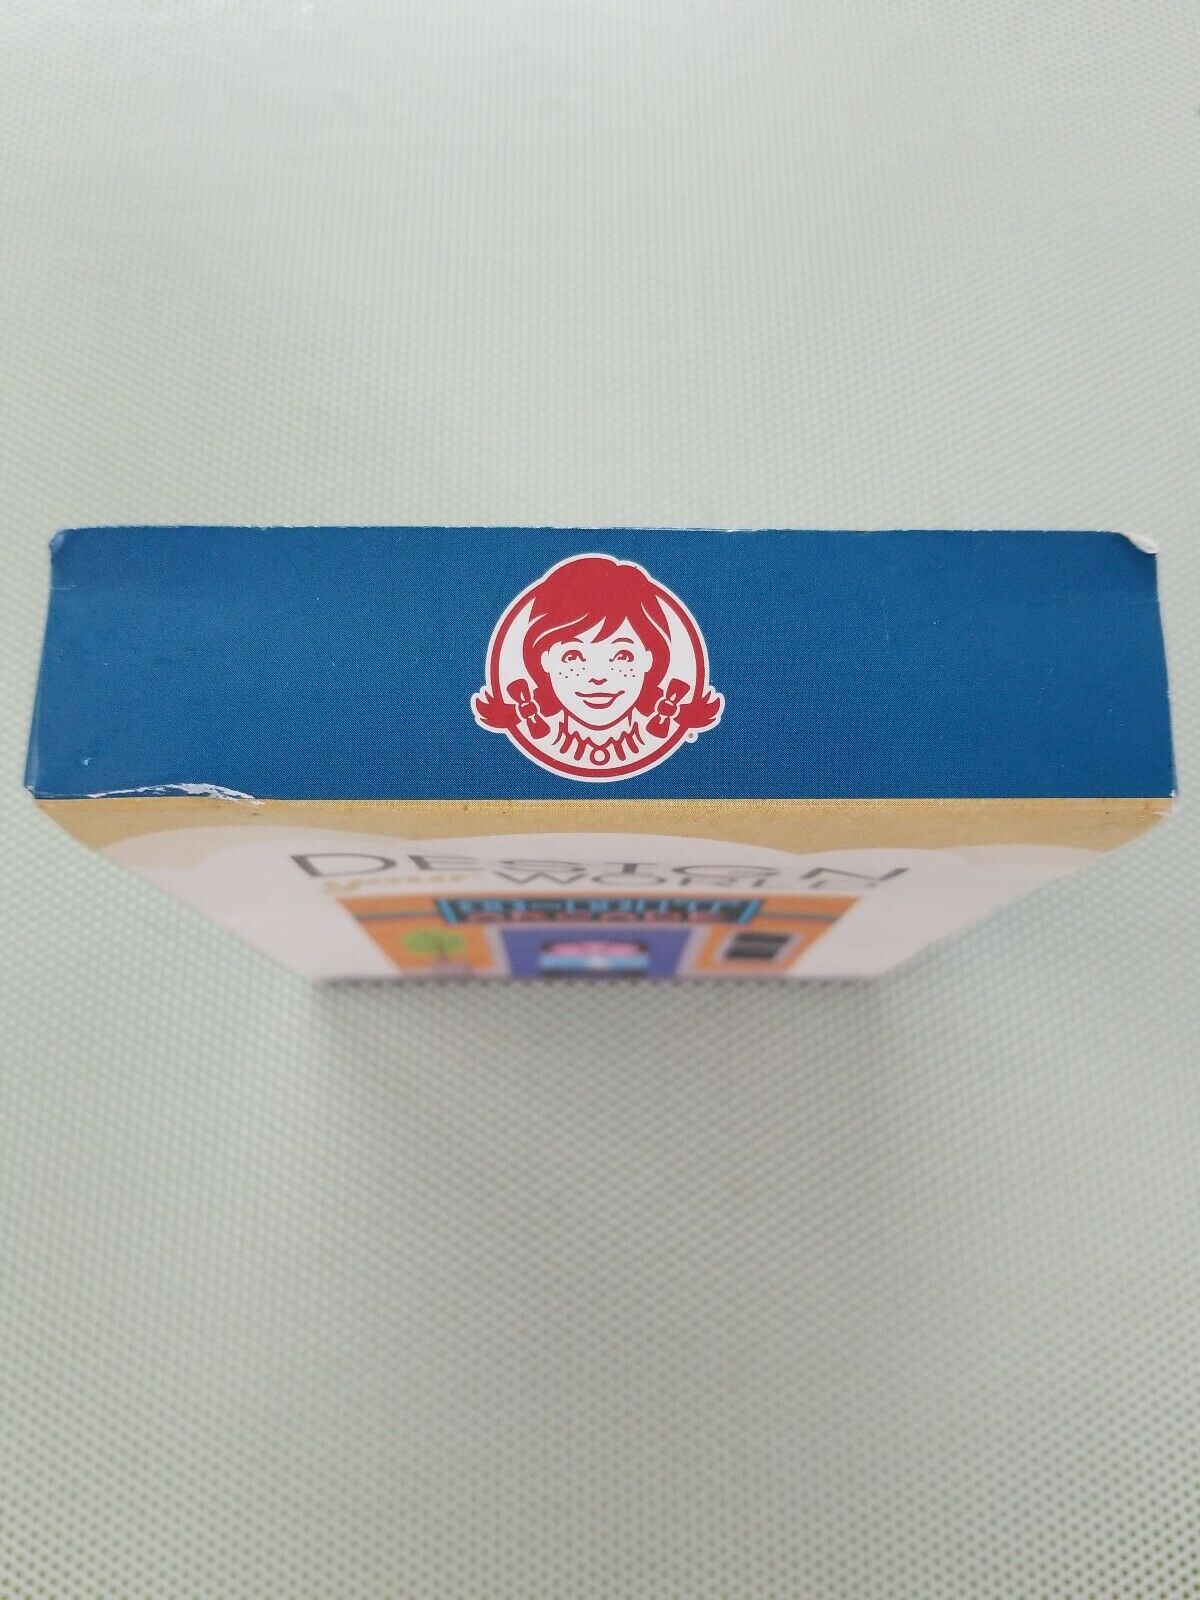 NEW/Sealed Details about   Design Your World 8-Bit Arcade Wendy's Kids Meal Toy 